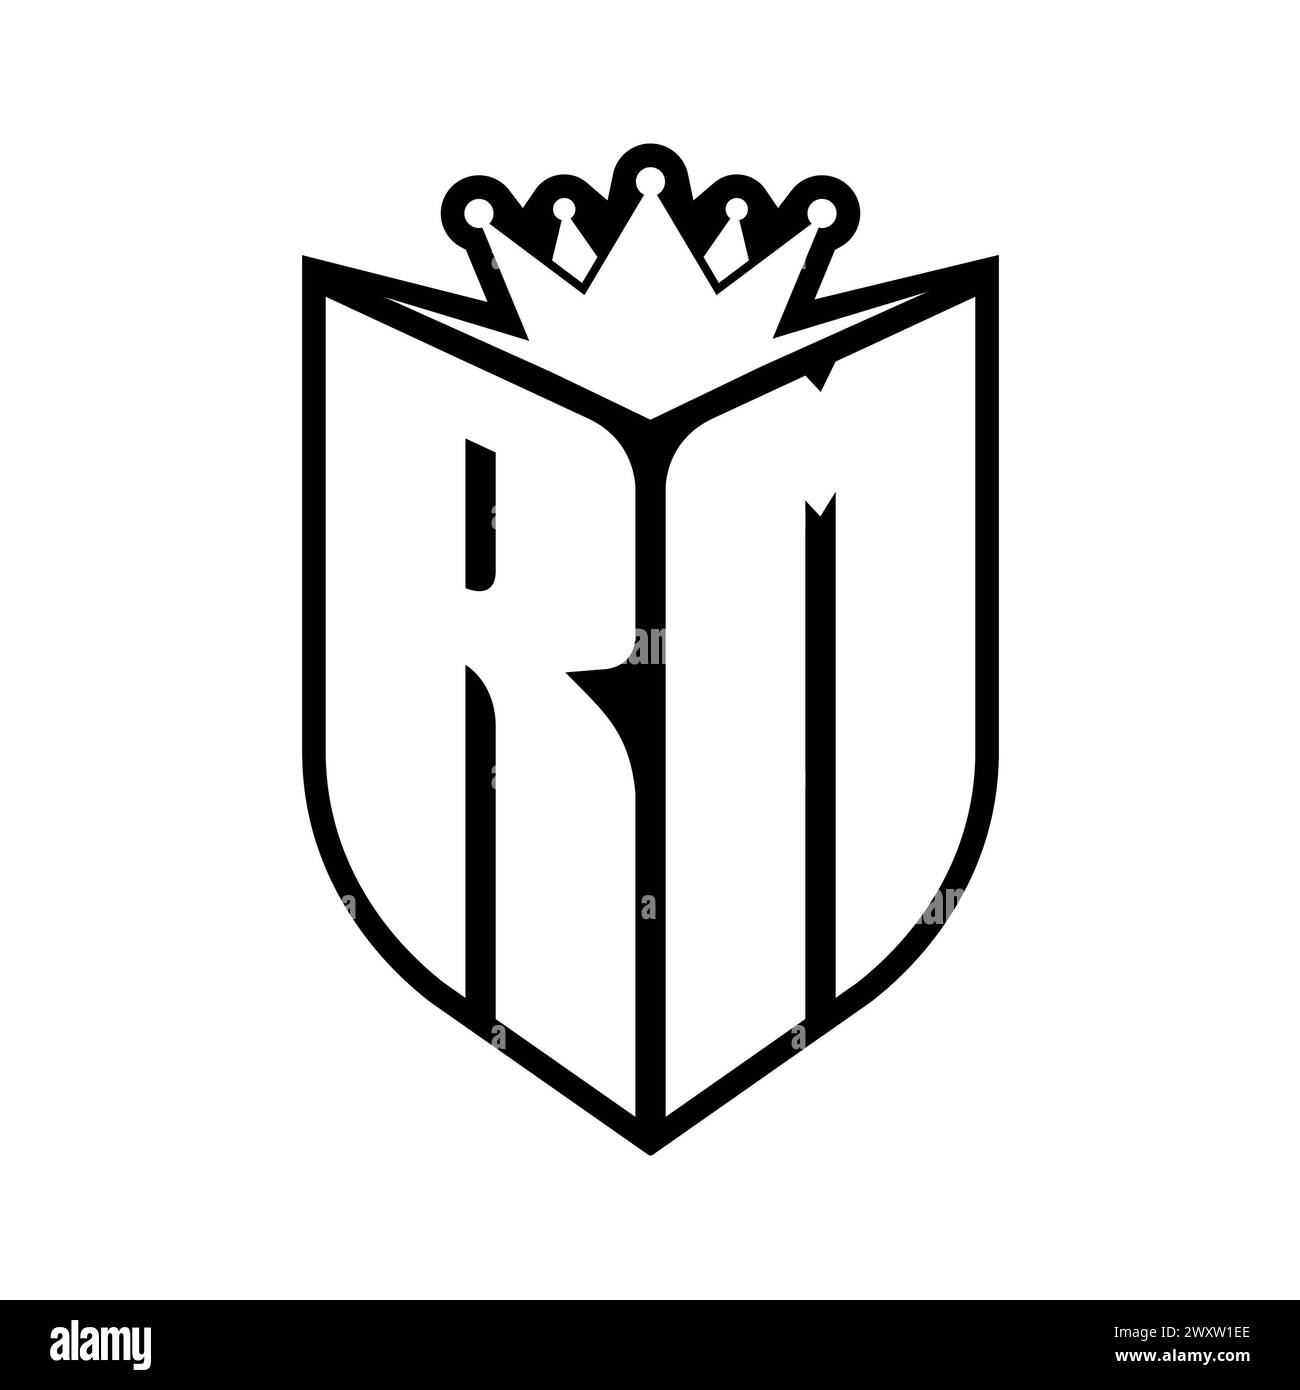 RM Letter bold monogram with shield shape and sharp crown inside shield black and white color design template Stock Photo